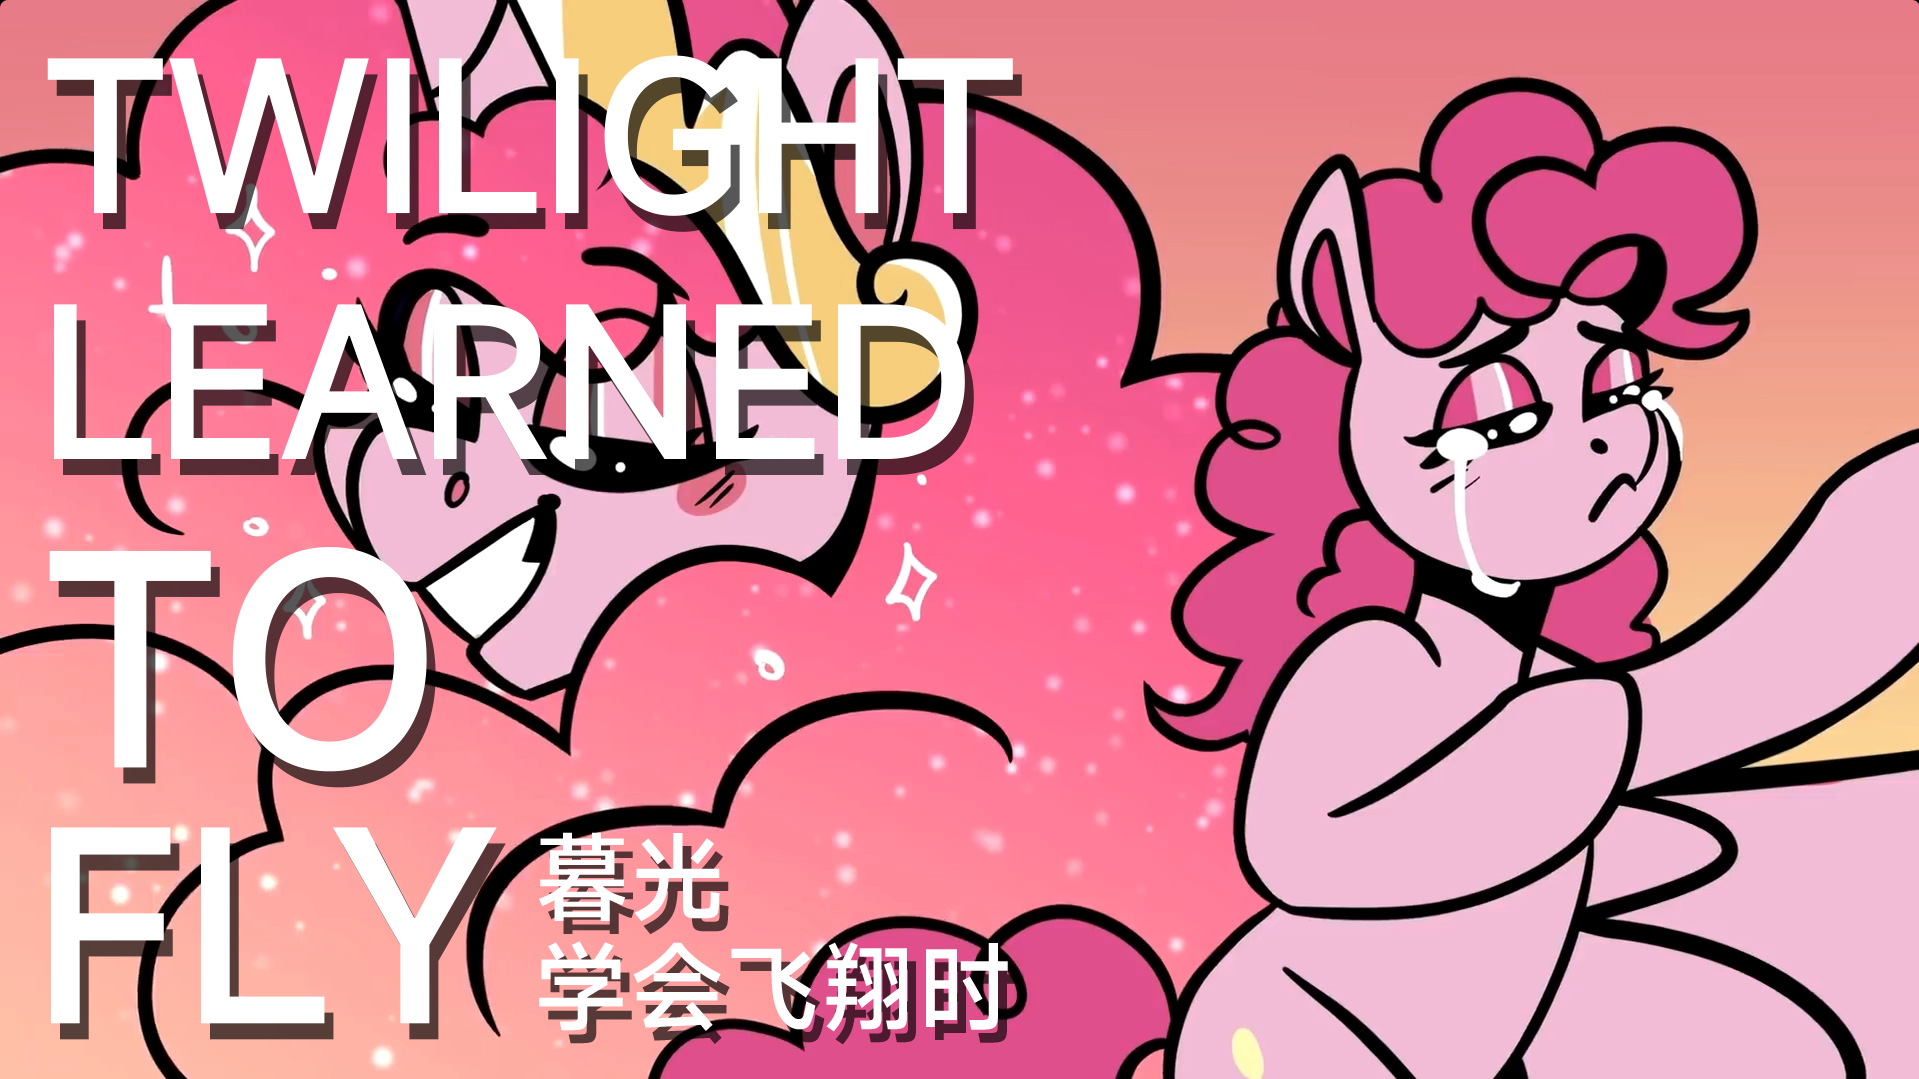 【MLP同人音乐中字】PrinceWhateverer – Twilight Learned To Fly（当暮光会飞翔之时）-EquestriaMemory